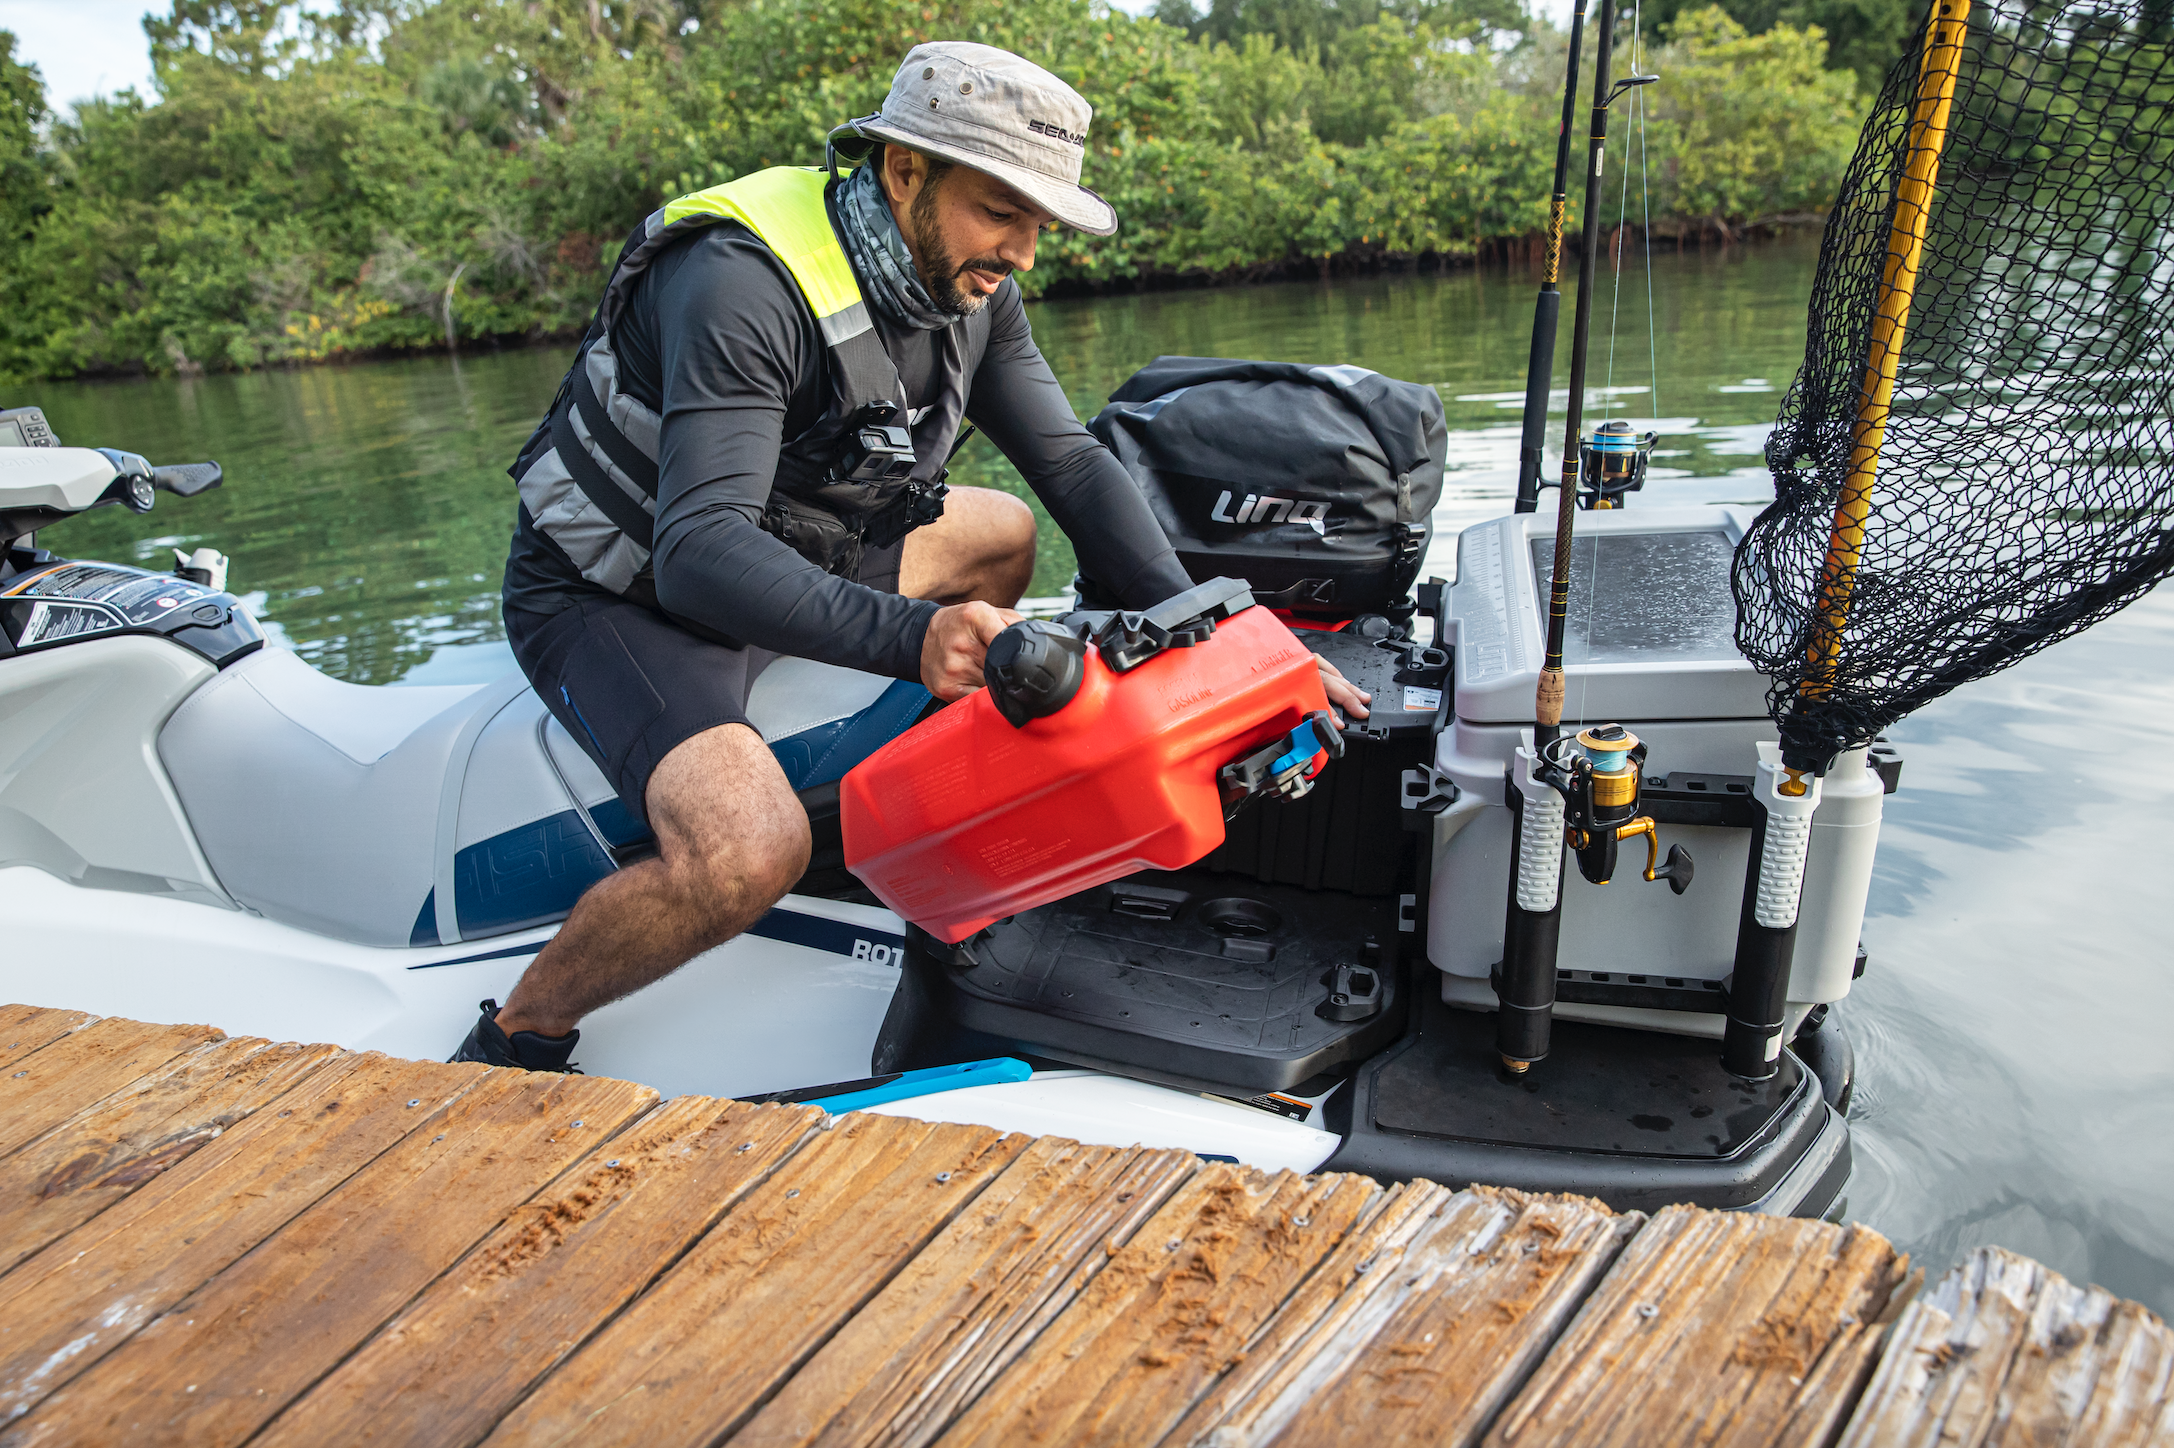 OUR MUST-HAVE ACCESSORIES FOR ANY SEA-DOO OWNER